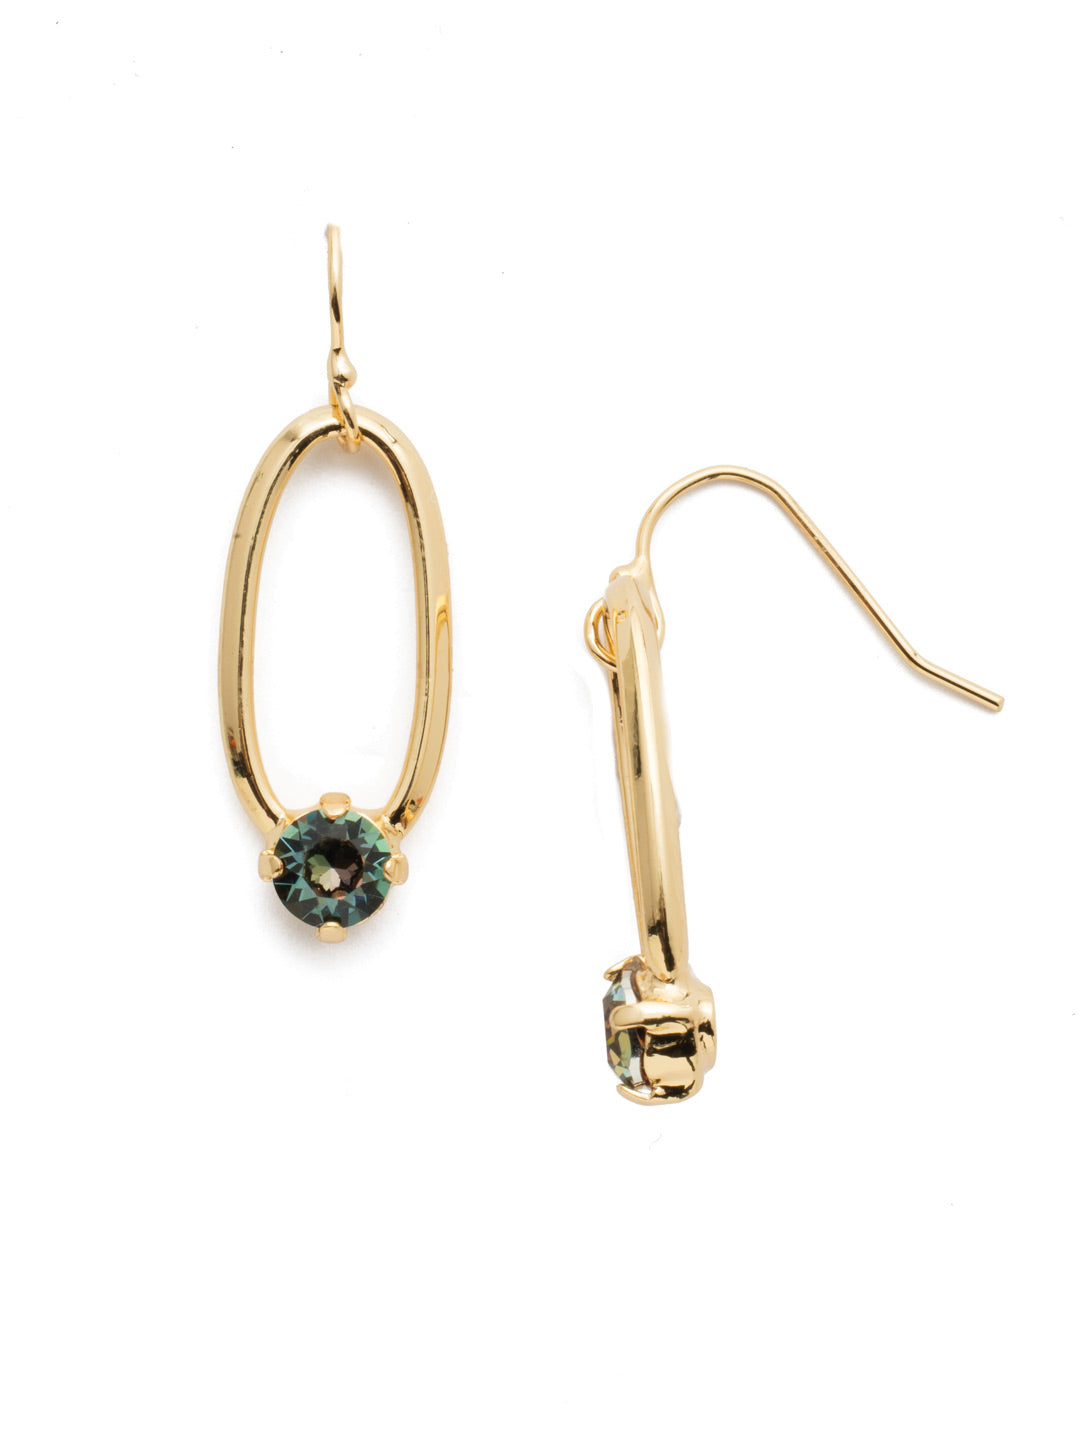 Paige Dangle Earrings - EET3BGCSM - Metallic hoops or sparkling cyrstal studs? You can combine both when you choose our Paige Dangle Earrings. From Sorrelli's Cashmere collection in our Bright Gold-tone finish.